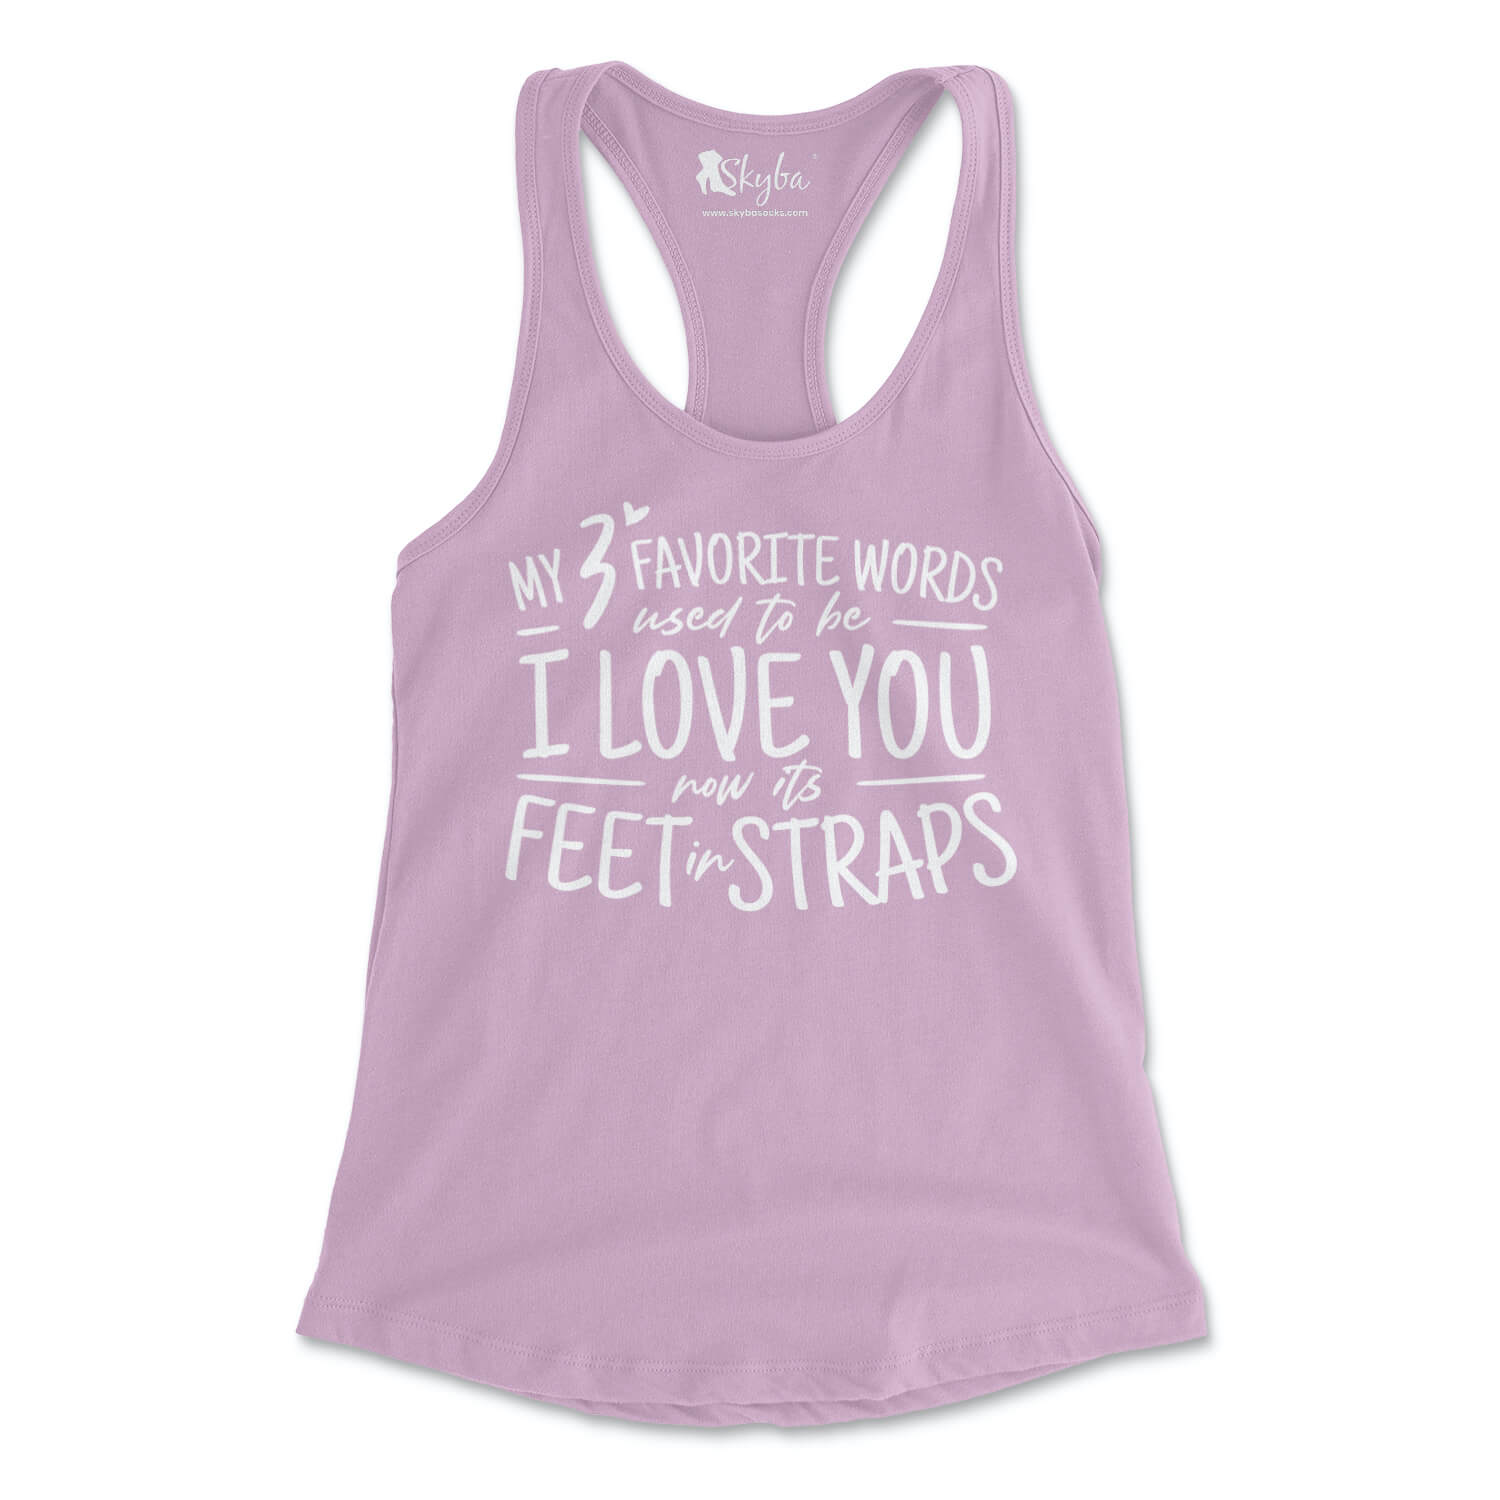 My 3 Favorite Words Used To Be I Love You Now It's Feet in Straps - Women's Slim Fit Tank Skyba Tank Top